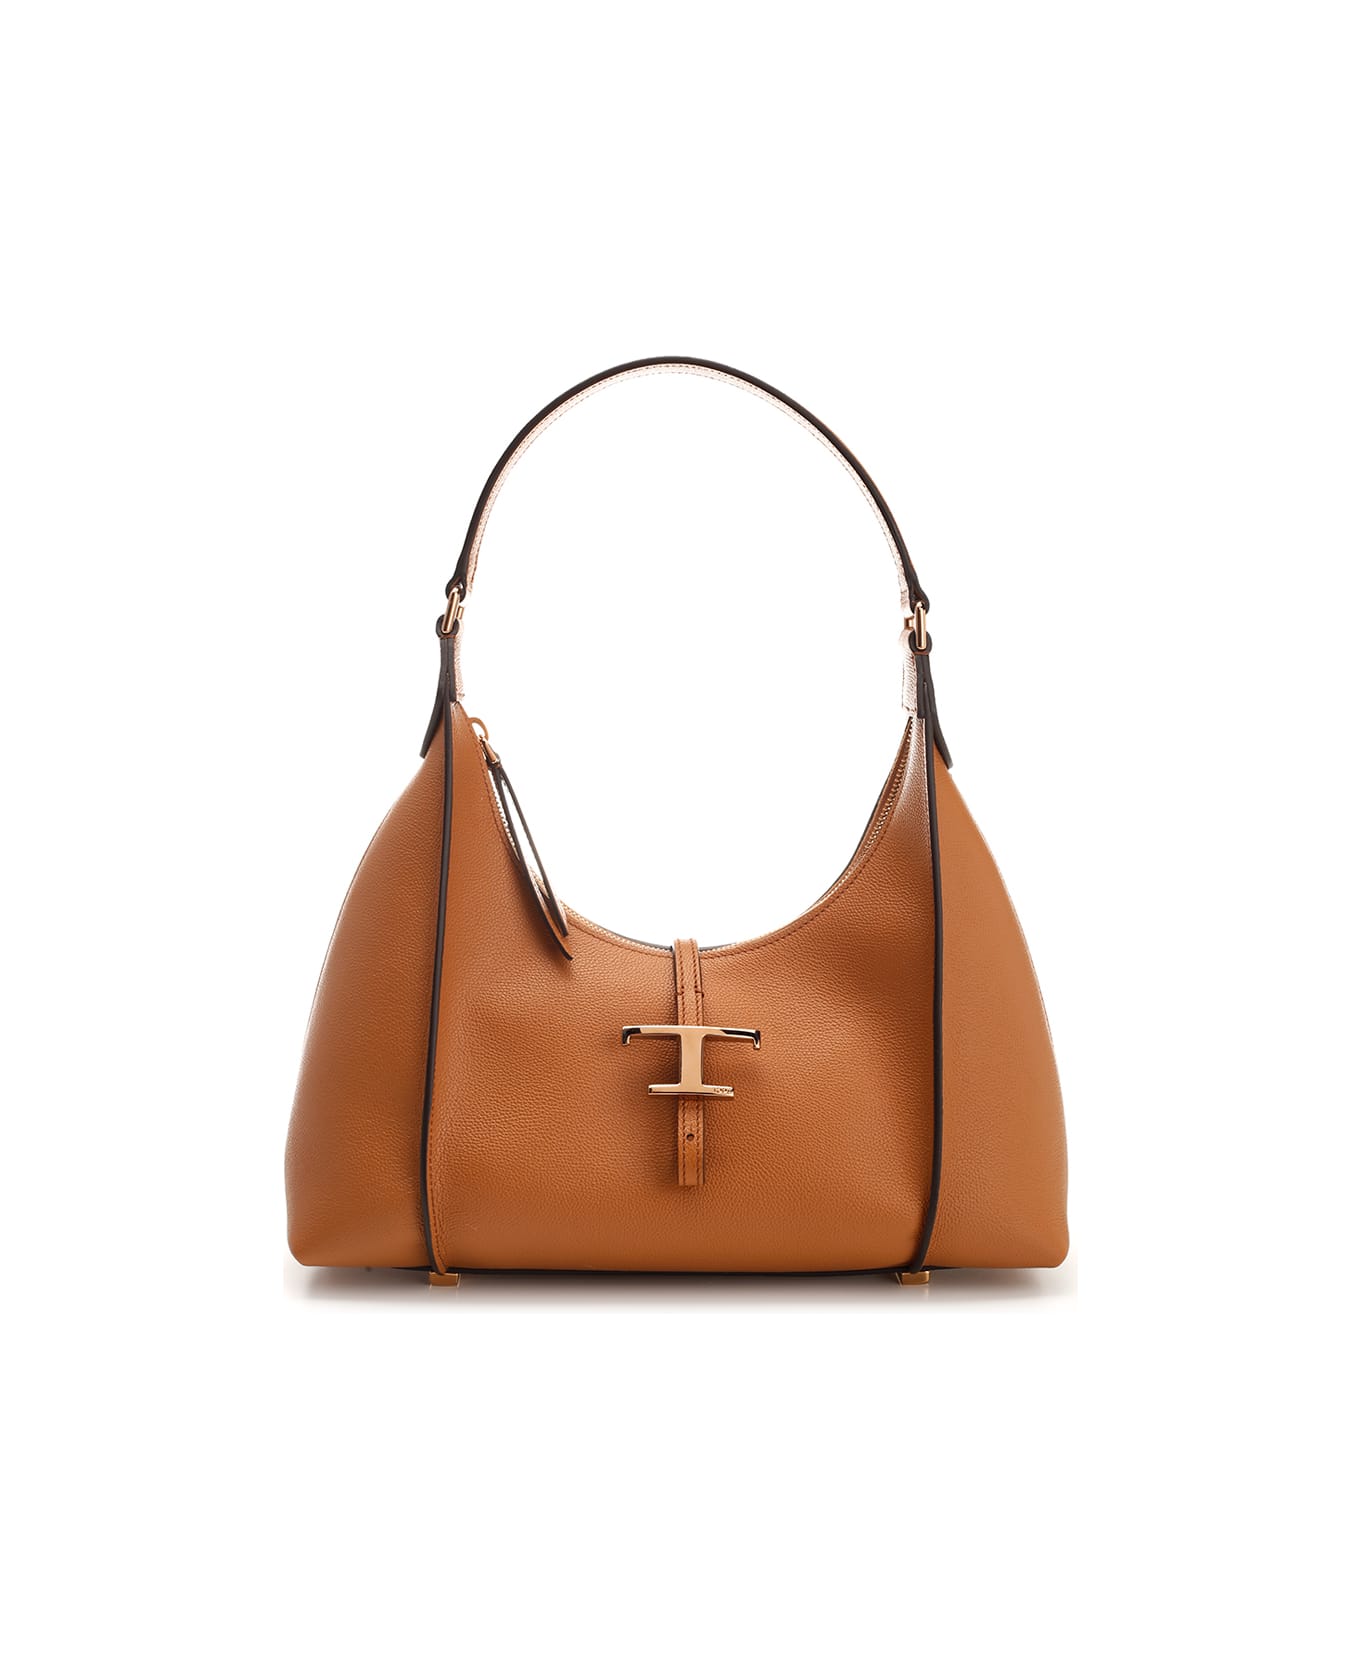 Tod's 't Timeless' Small Hobo Bag - KENIA SCURO トートバッグ